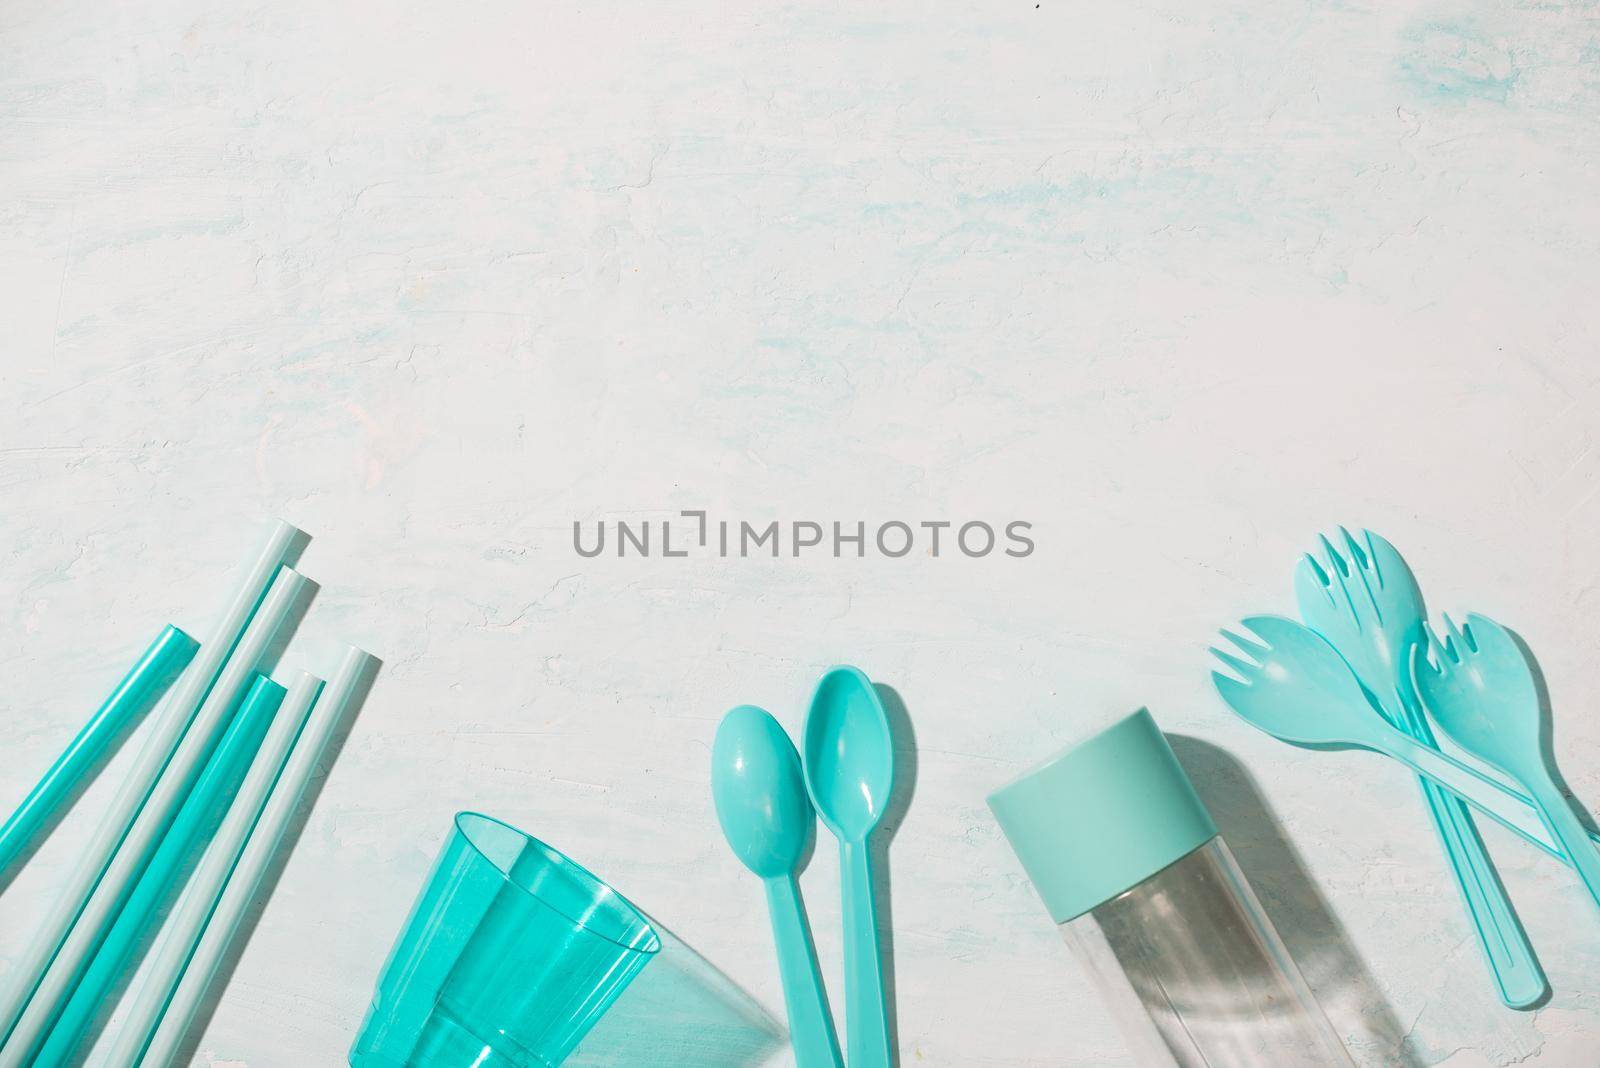 No plastic recycle concept blue plastic dishes plates cups spoon isolated white background, copy space, top view